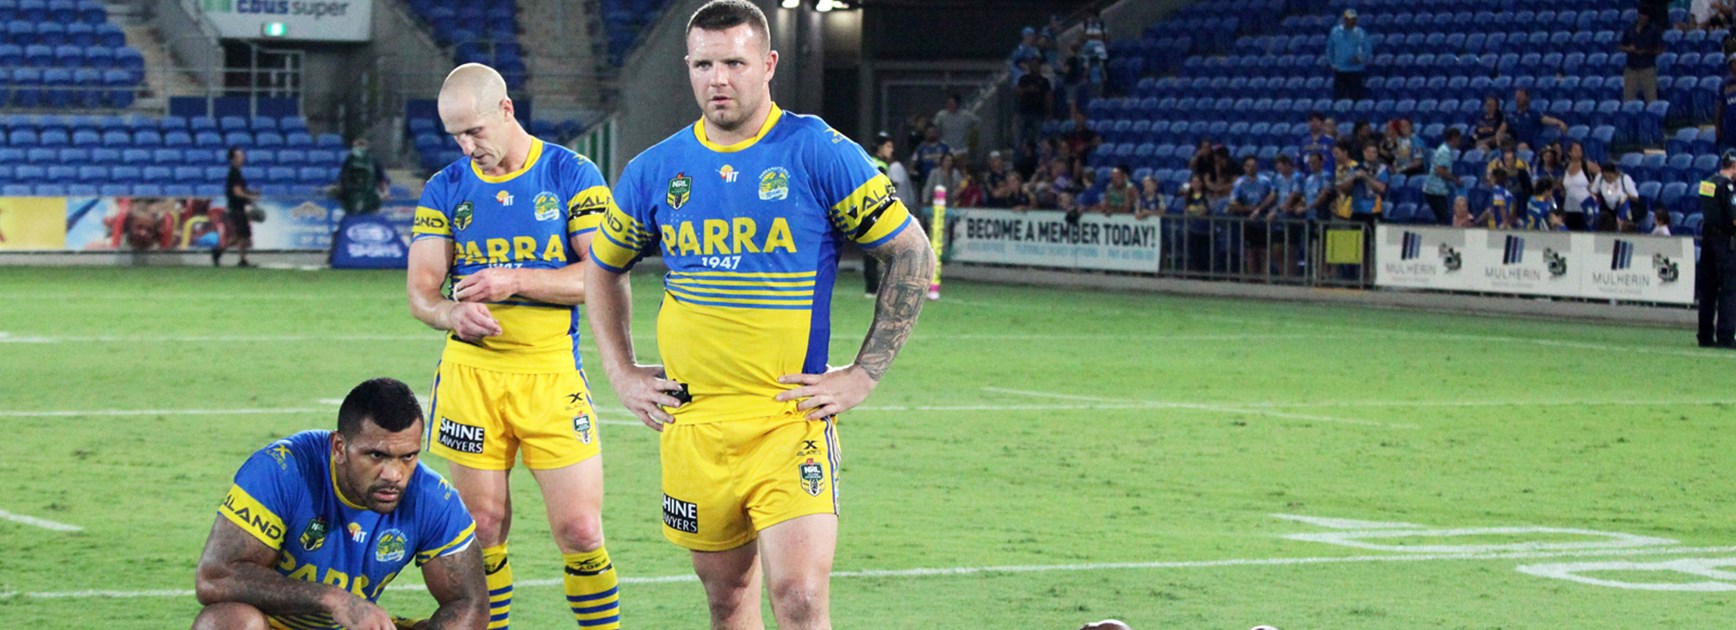 The Eels after their Round 3 loss to the Titans.